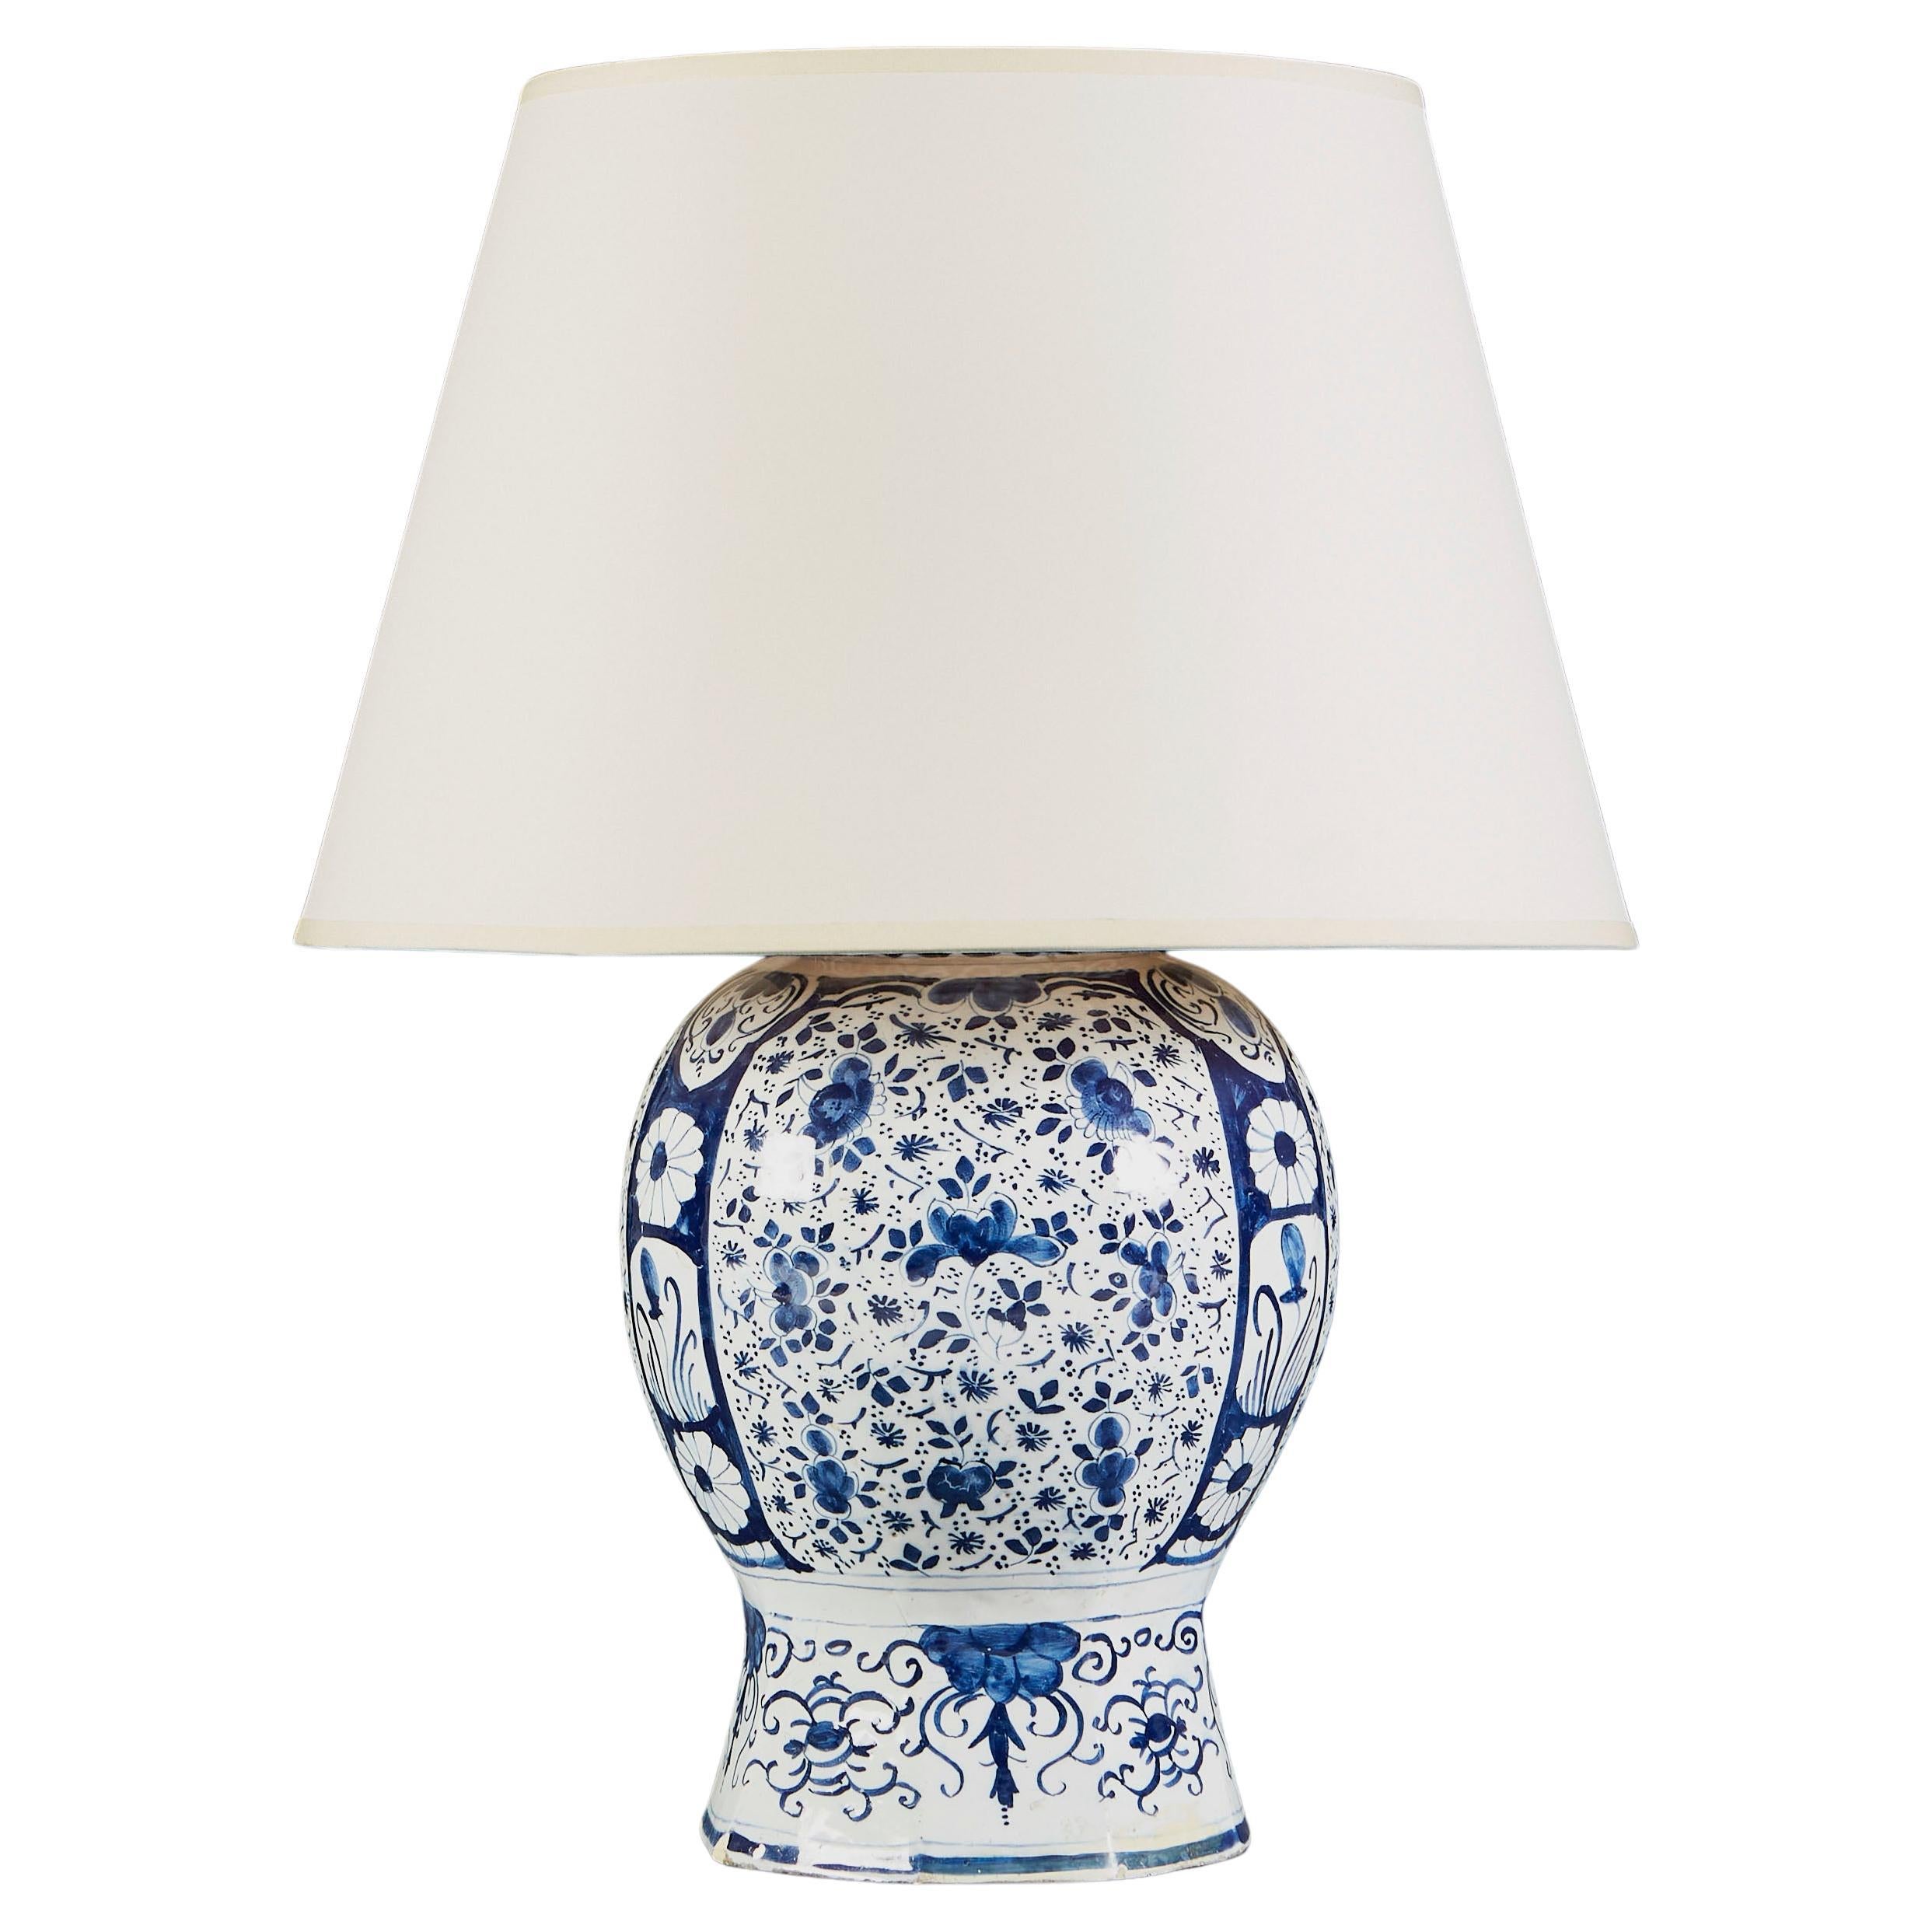 Large Scale Blue and White Delft Vase as a Lamp